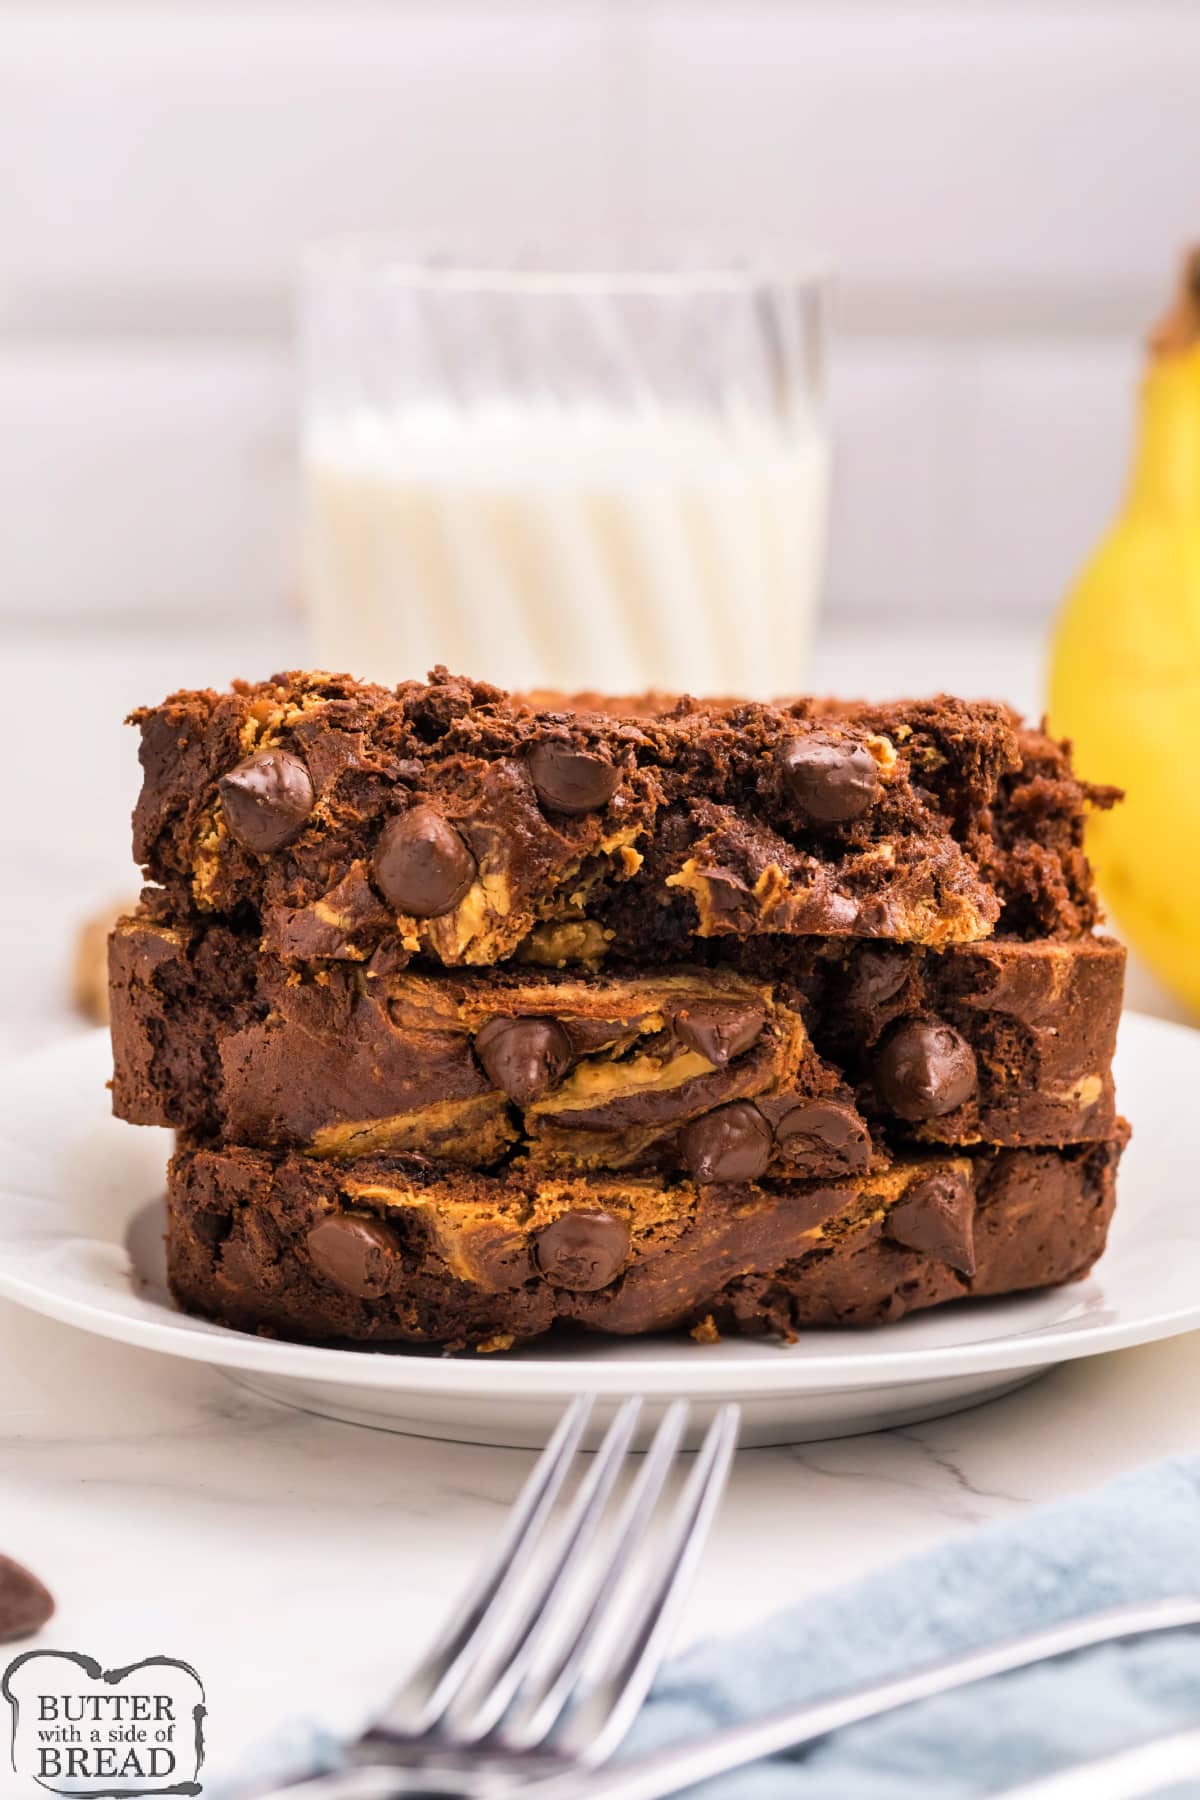 Chocolate Peanut Butter Banana Bread is a twist on the traditional banana bread recipe.  Banana bread is even better when you add chocolate and peanut butter! 